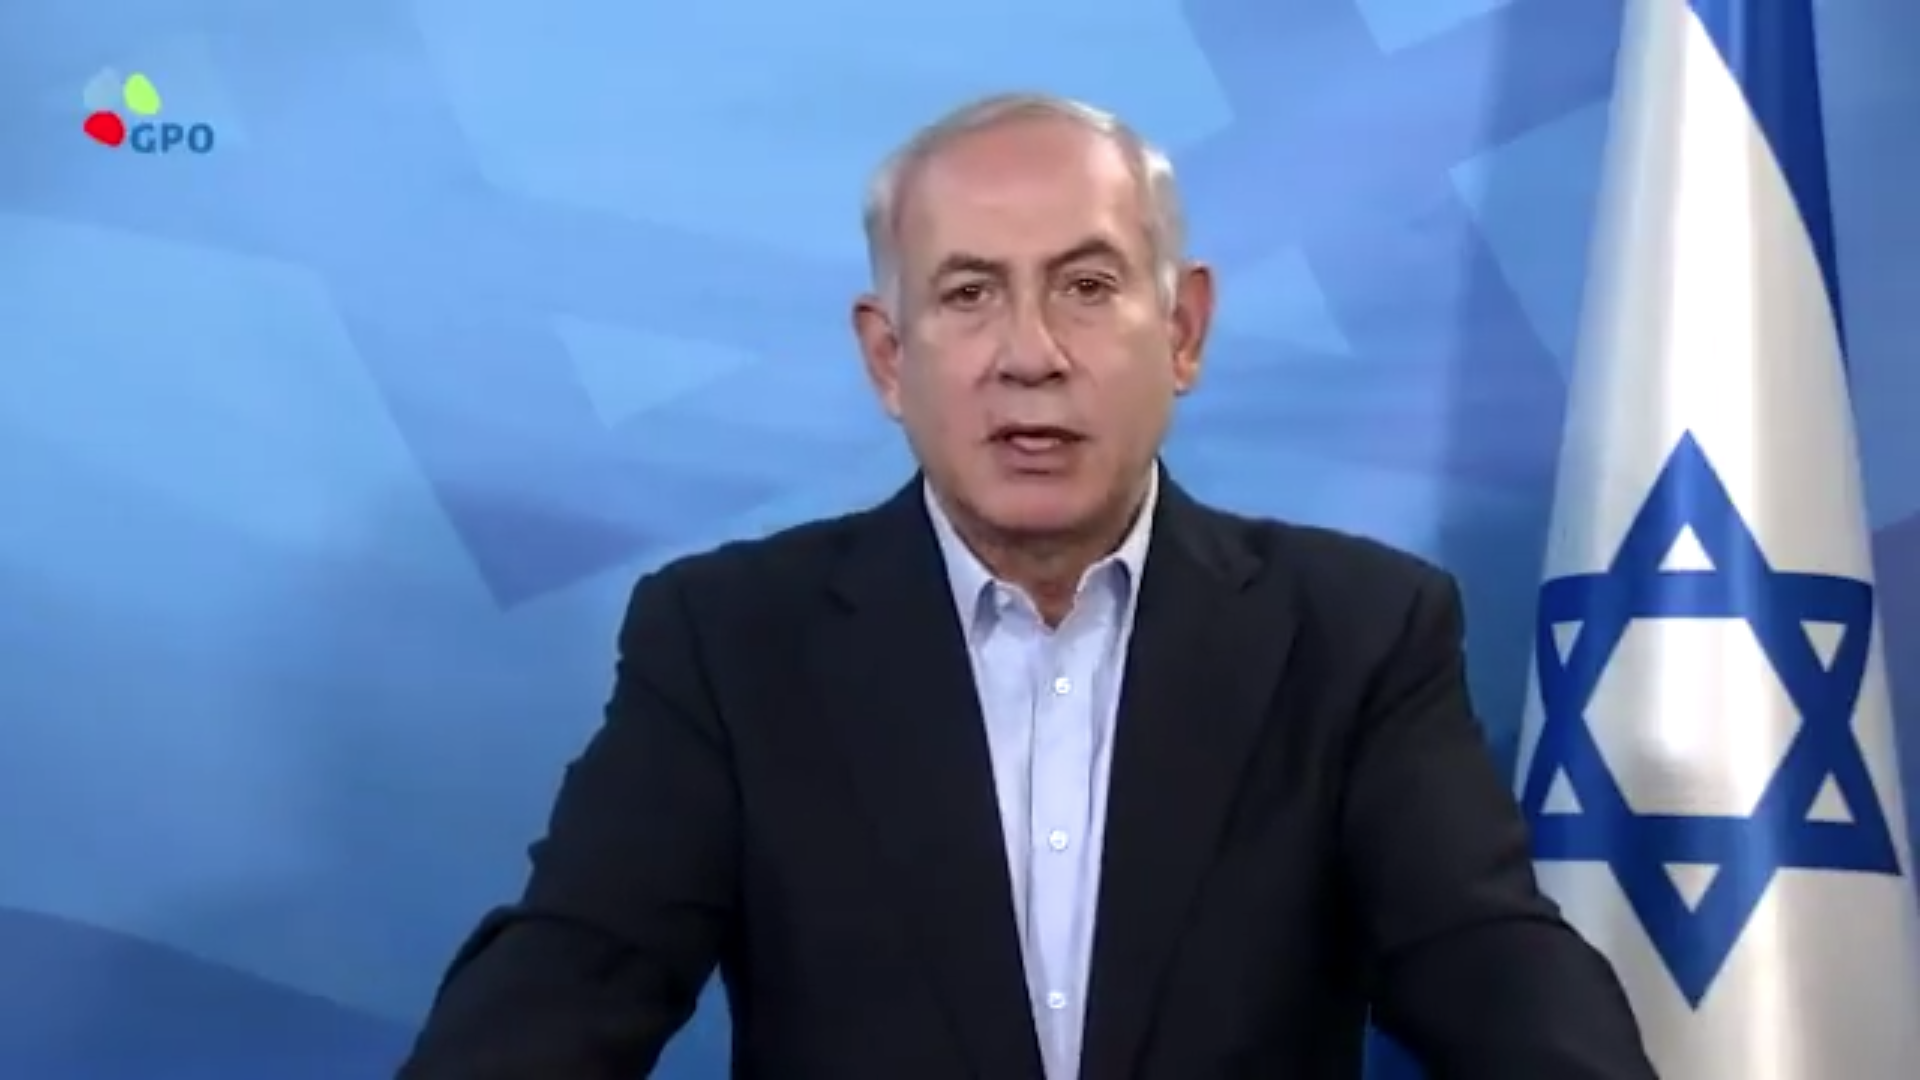 Netanyahu: Israel will not allow Iranian entrenchment in Syria | The ...